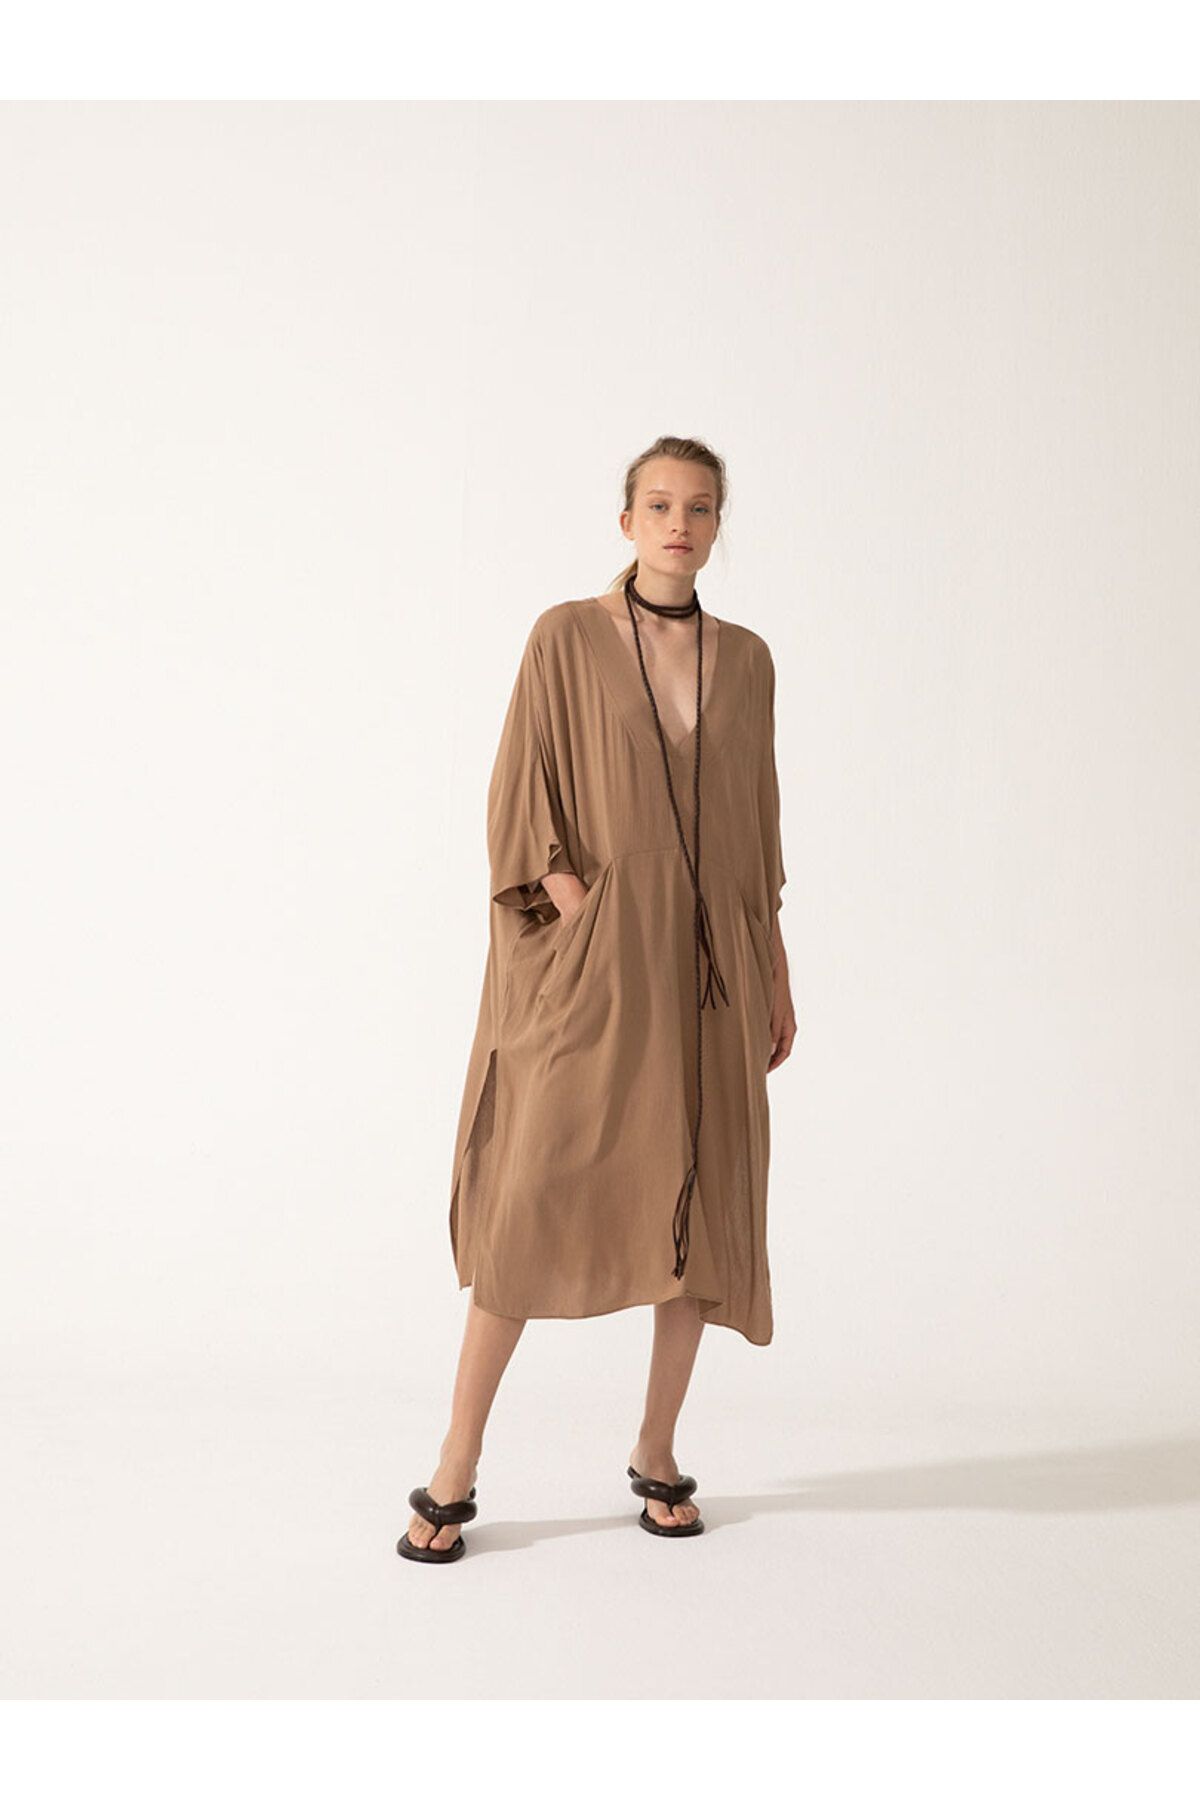 Rivus Loose Fit Pareo-Elbise - Camel